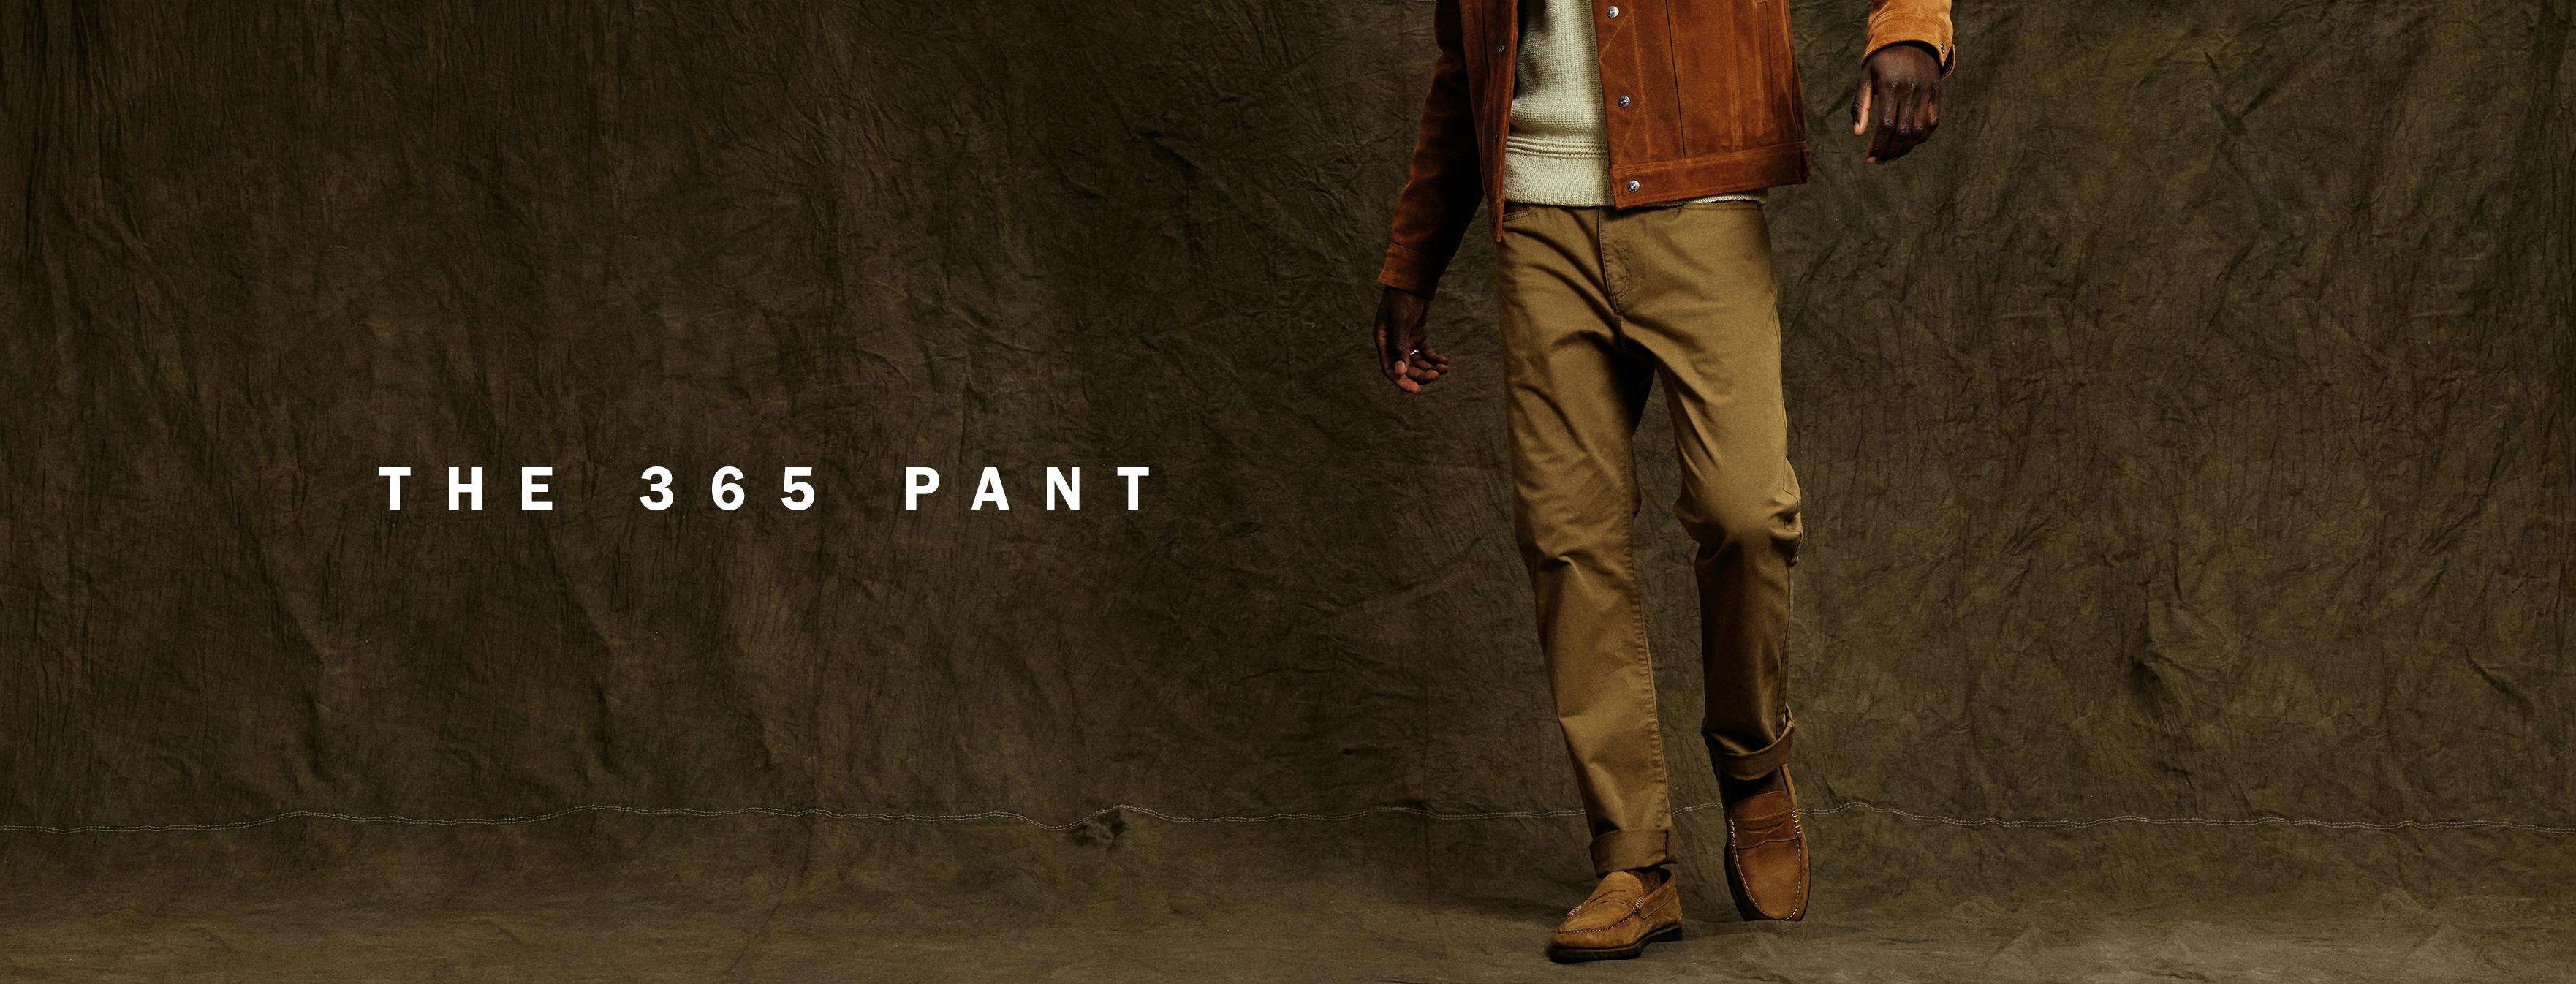 the 365 pant